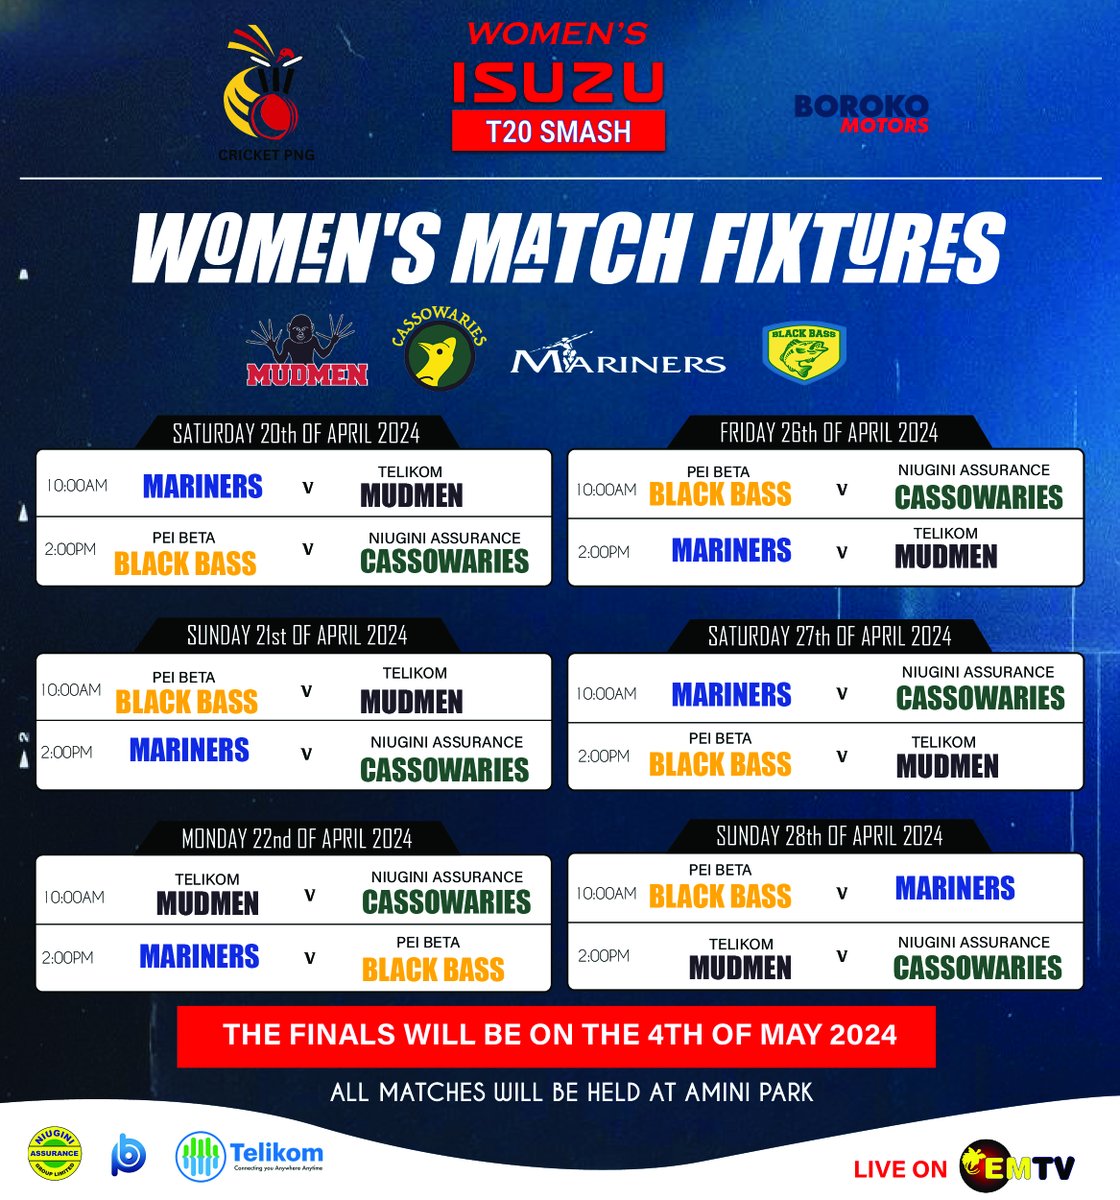 The Women’s Isuzu T20 Smash Cricket competition is set to kick off tomorrow, 20th of April 2024, 10am at the Amini Park in Port Moresby. Read more: emtv.com.pg/womens-isuzu-t…